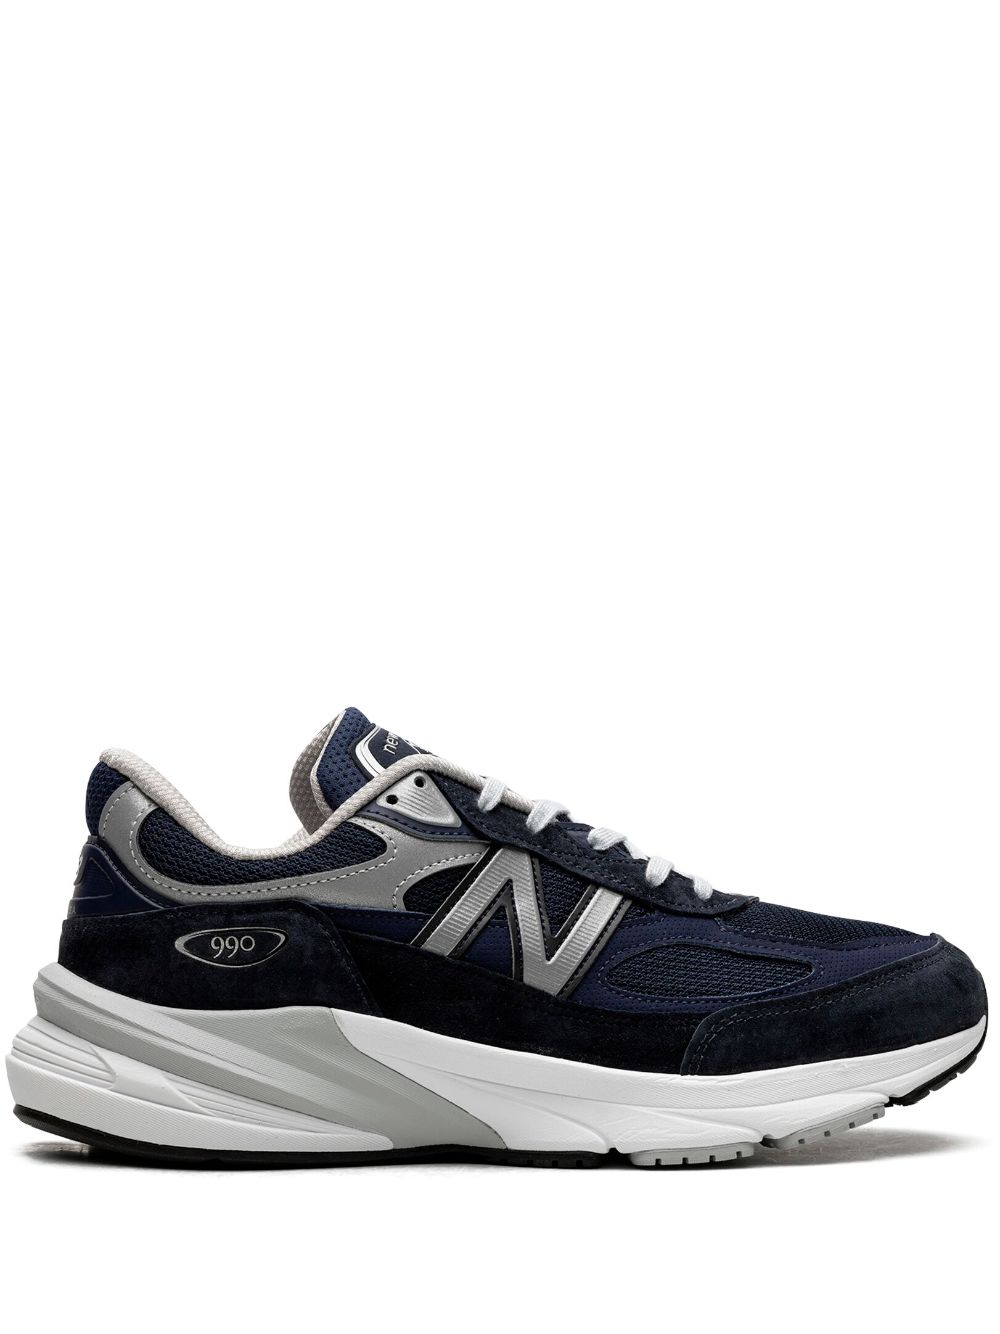 New Balance 990v6 "Navy" leather sneakers - Blue von New Balance